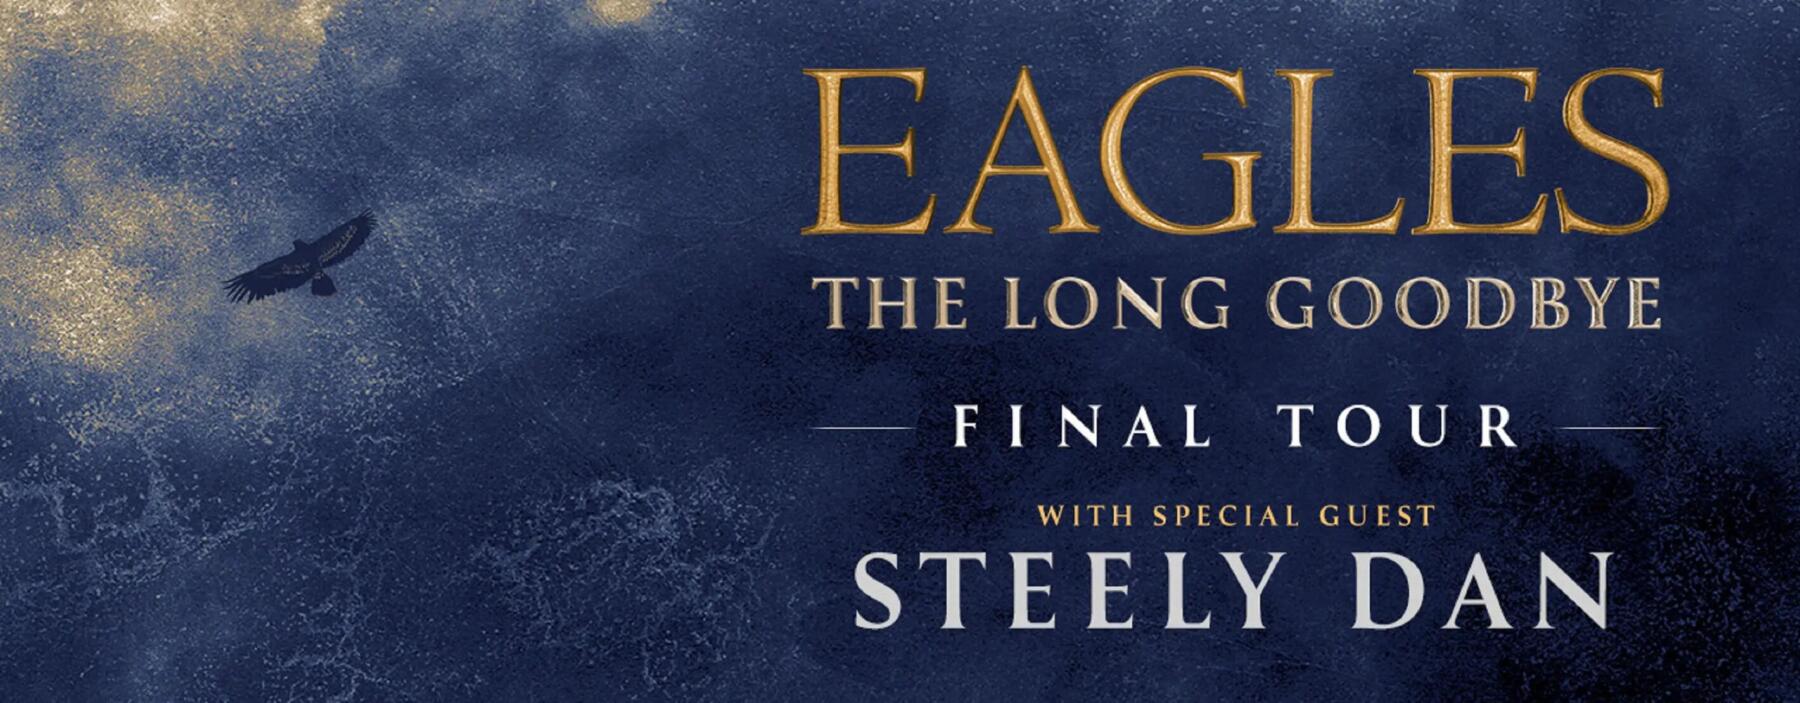 The Eagles & Steely Dan